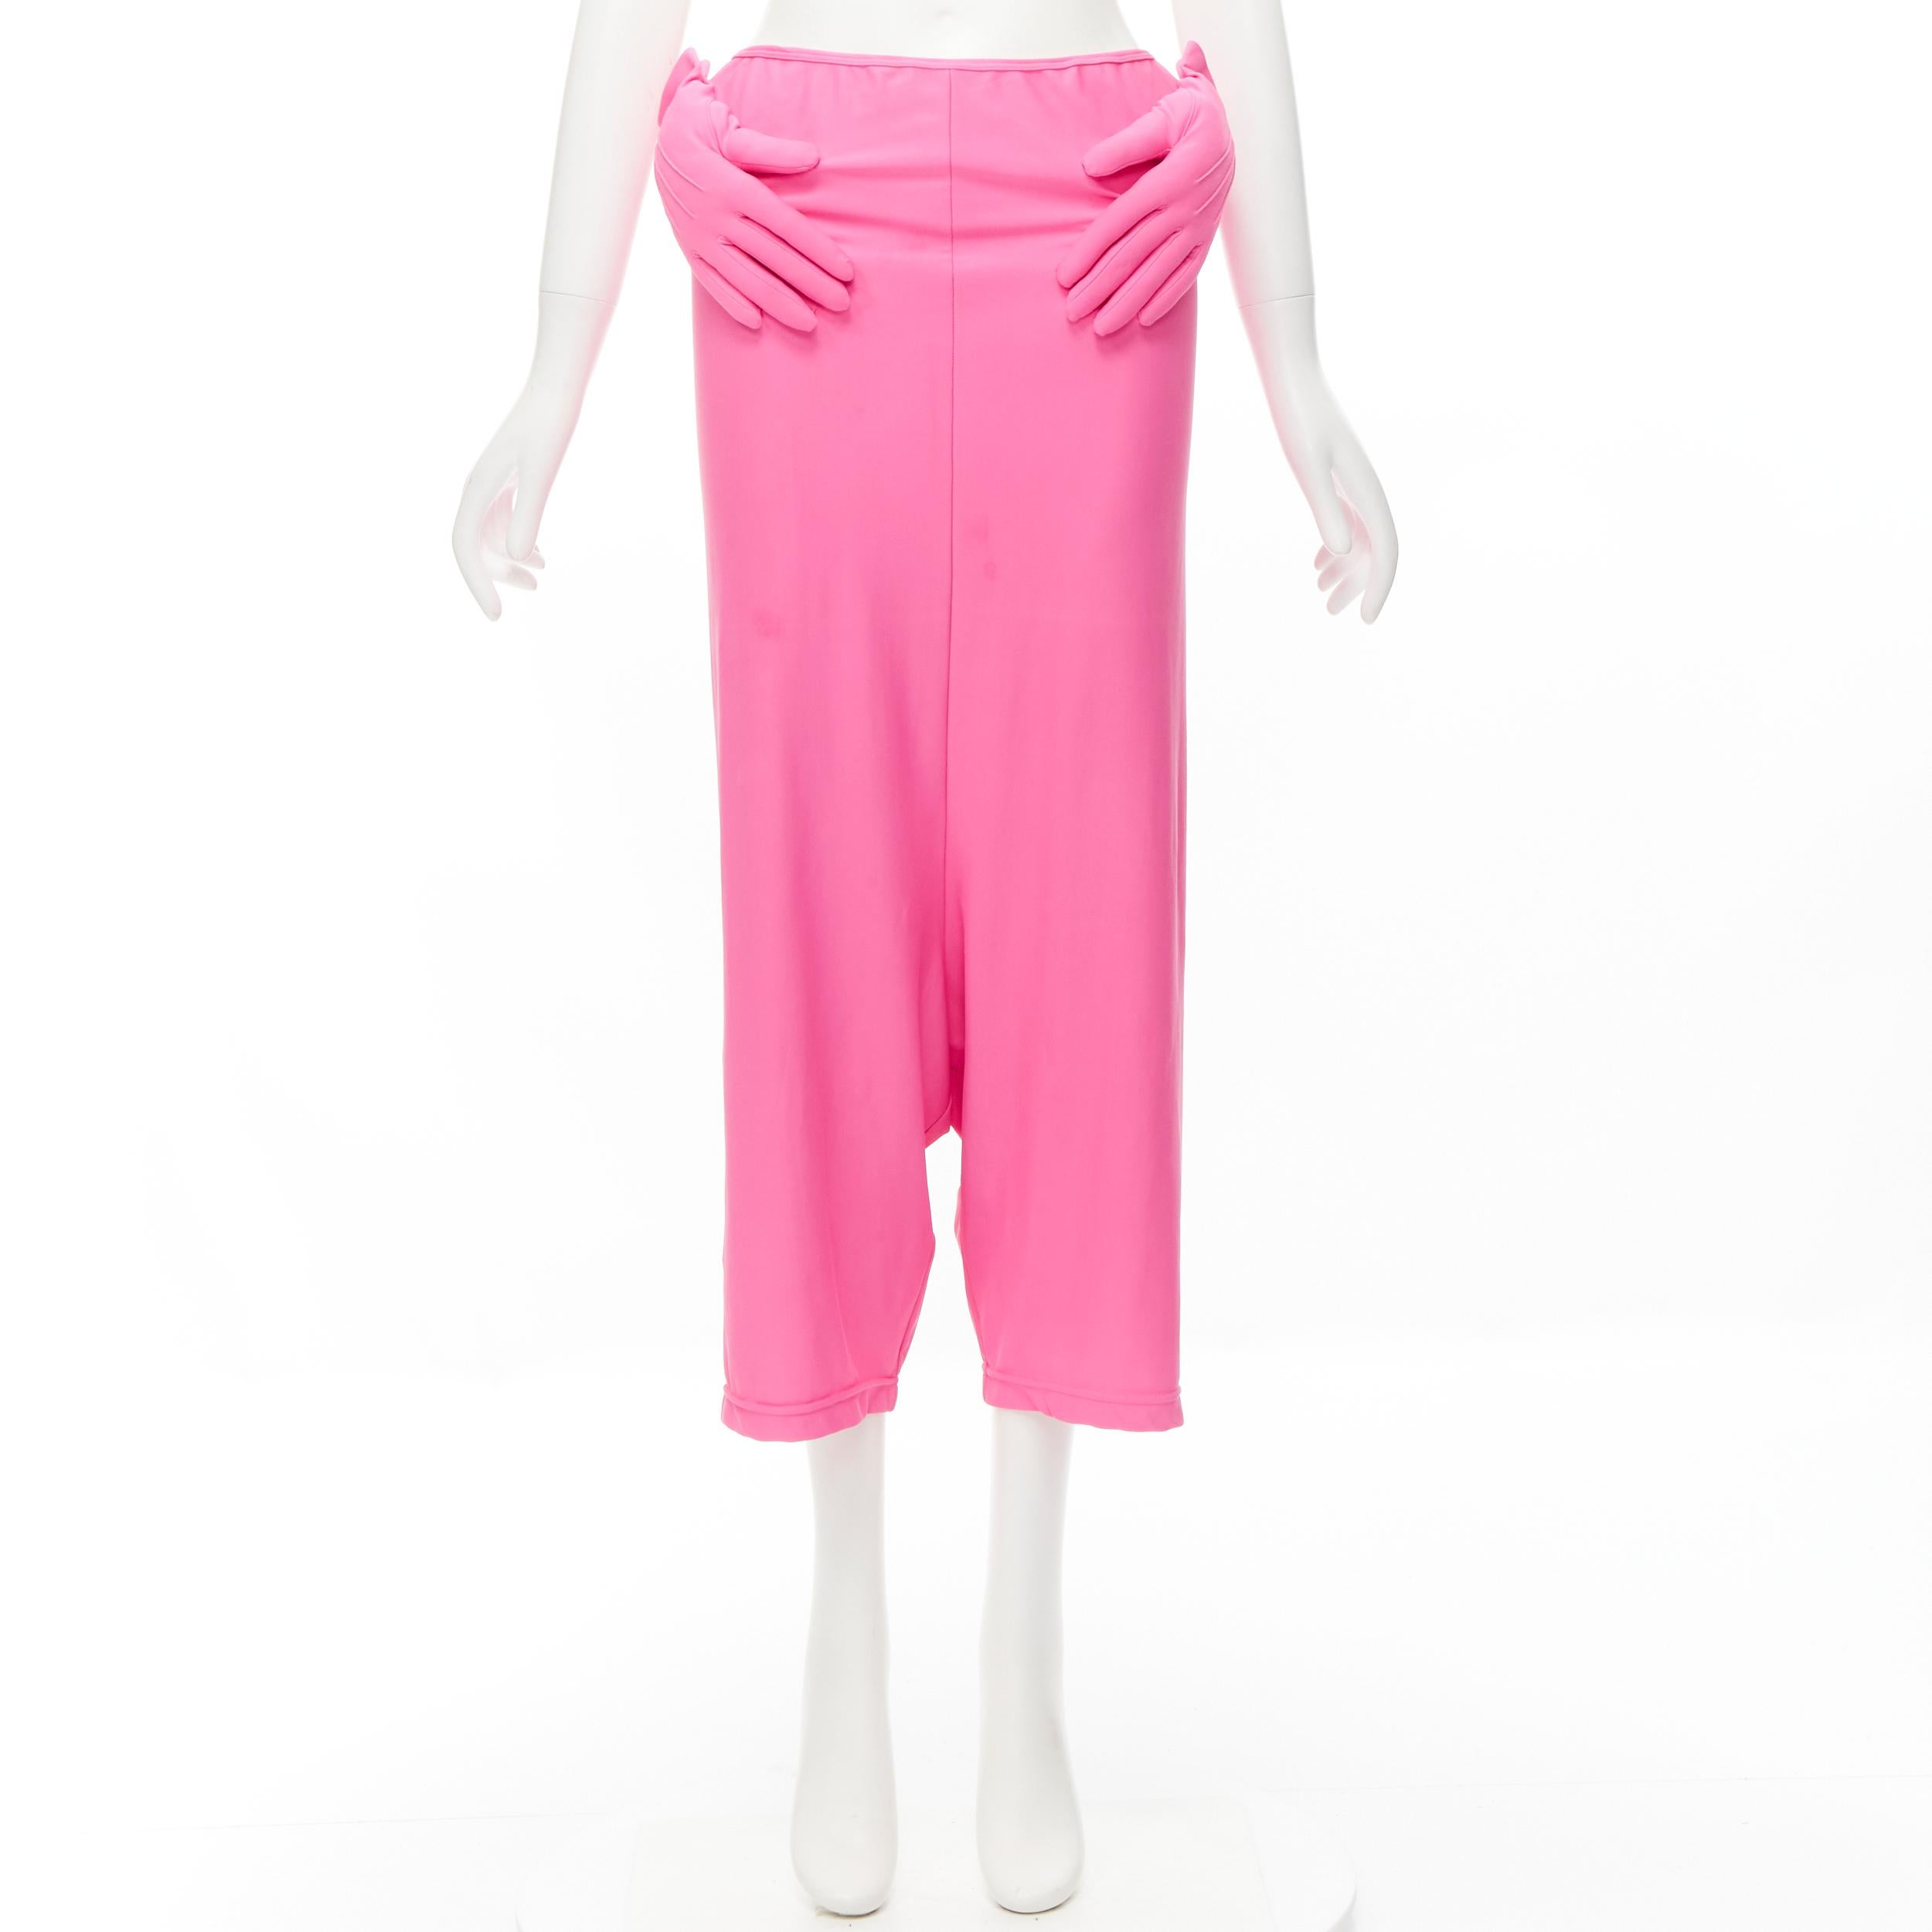 COMME DES GARCONS 2007 Runway padded gloves pink dropped crotch pants M 5